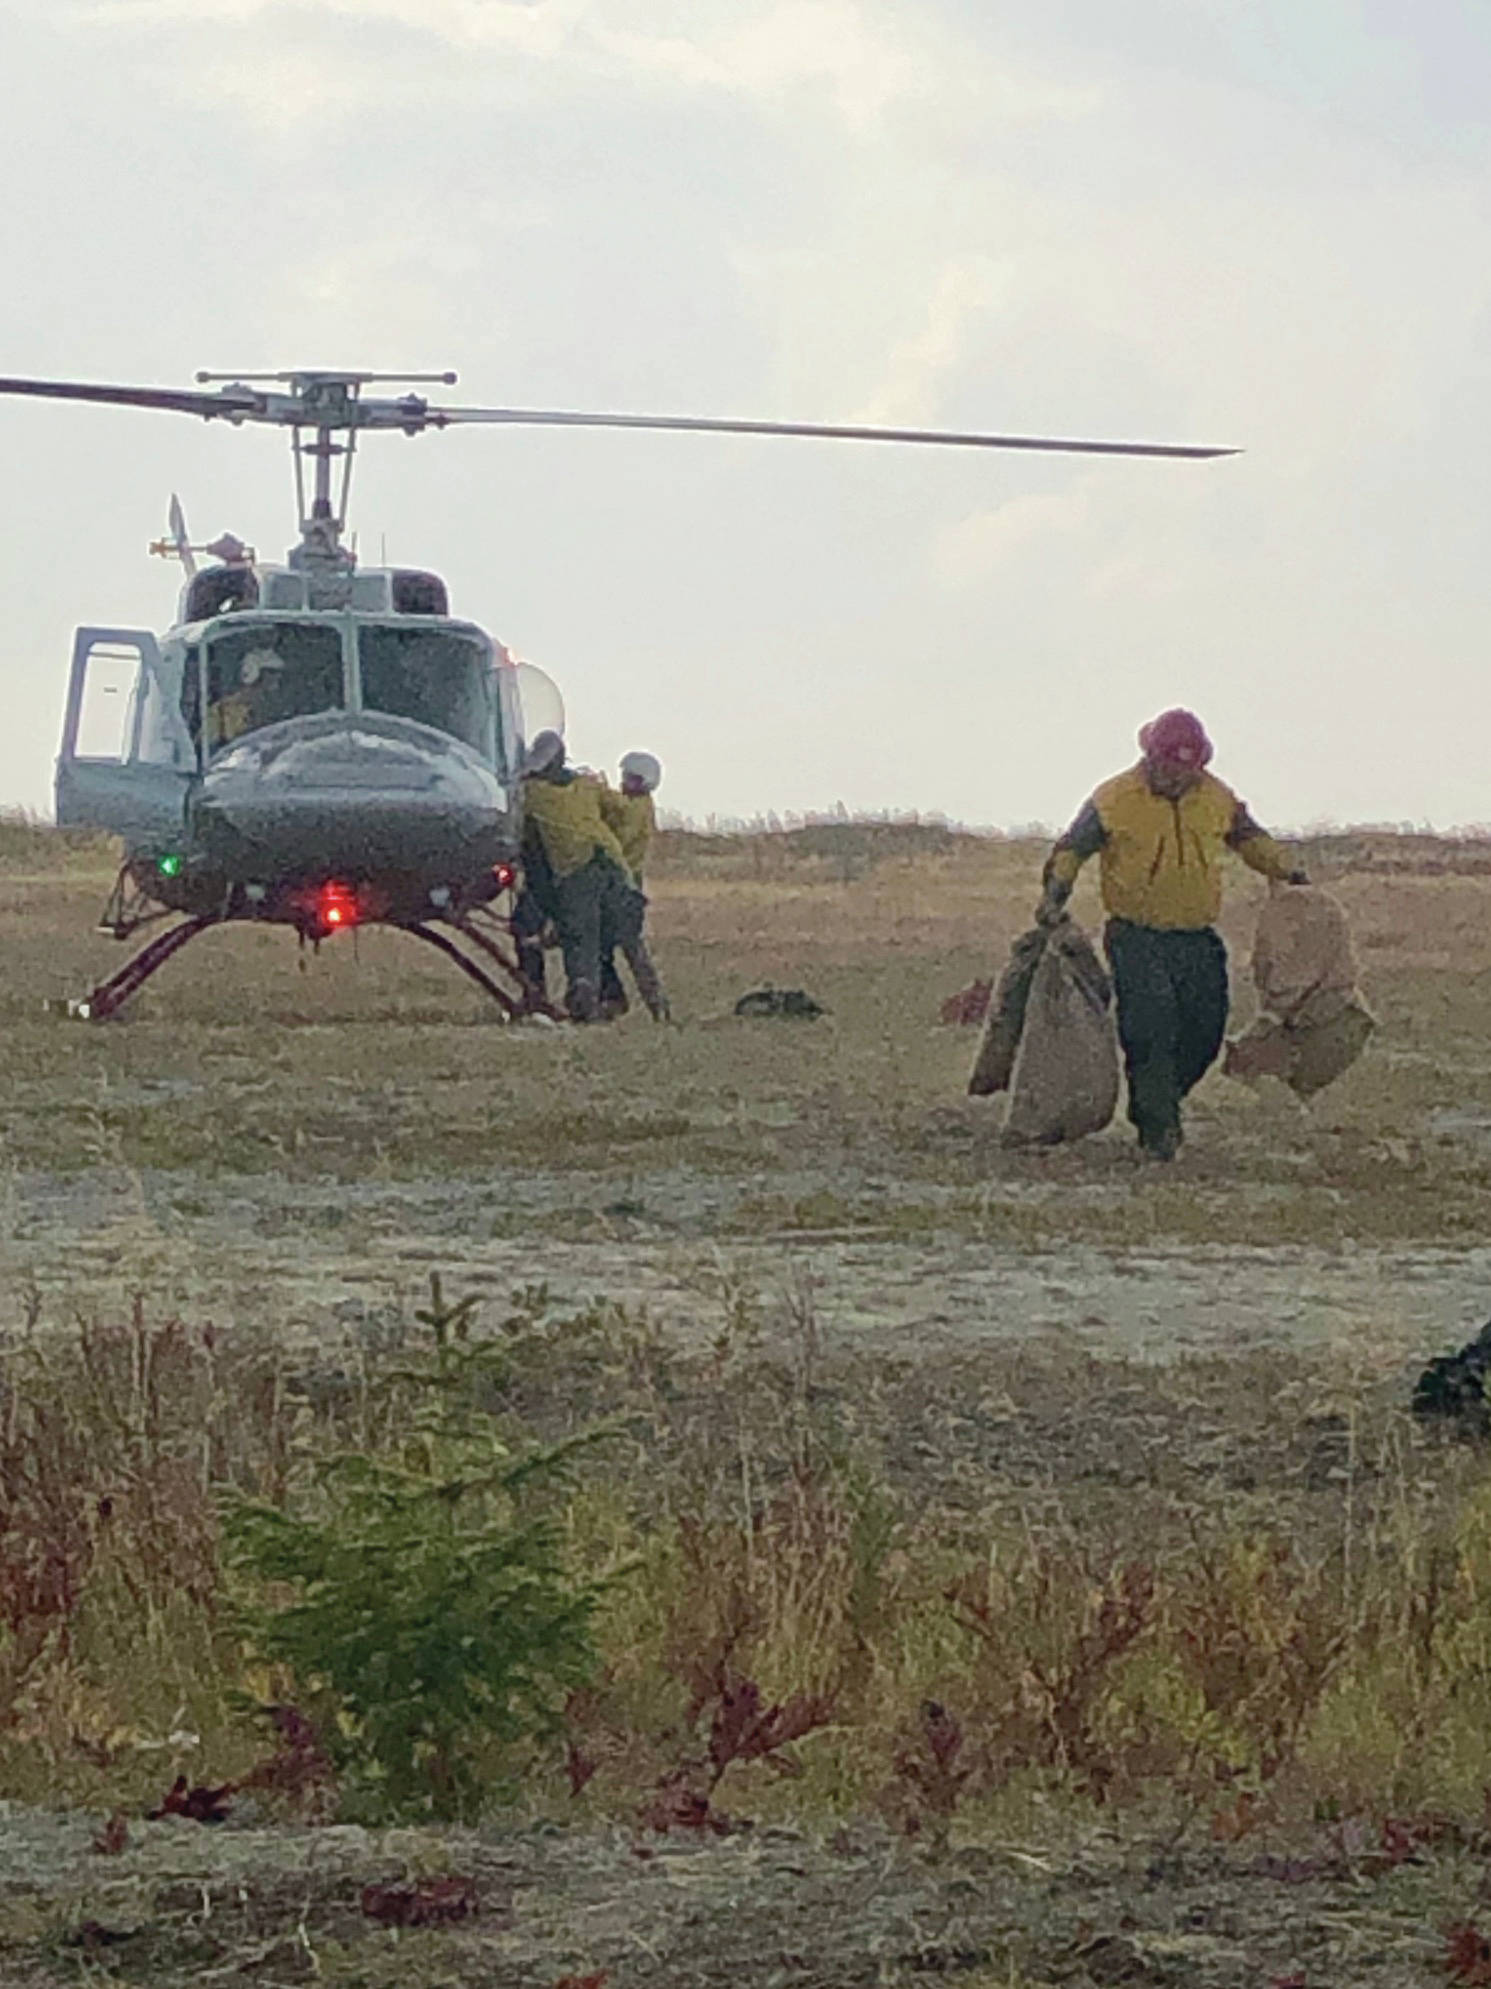 Firefighters unload supplies from a helicopter at the Caribou Lake Fire on Monday, Aug 26, 2019, northeast of Homer, Alaska. (Photo by Sarah Saarloos/Alaska Division of Forestry)